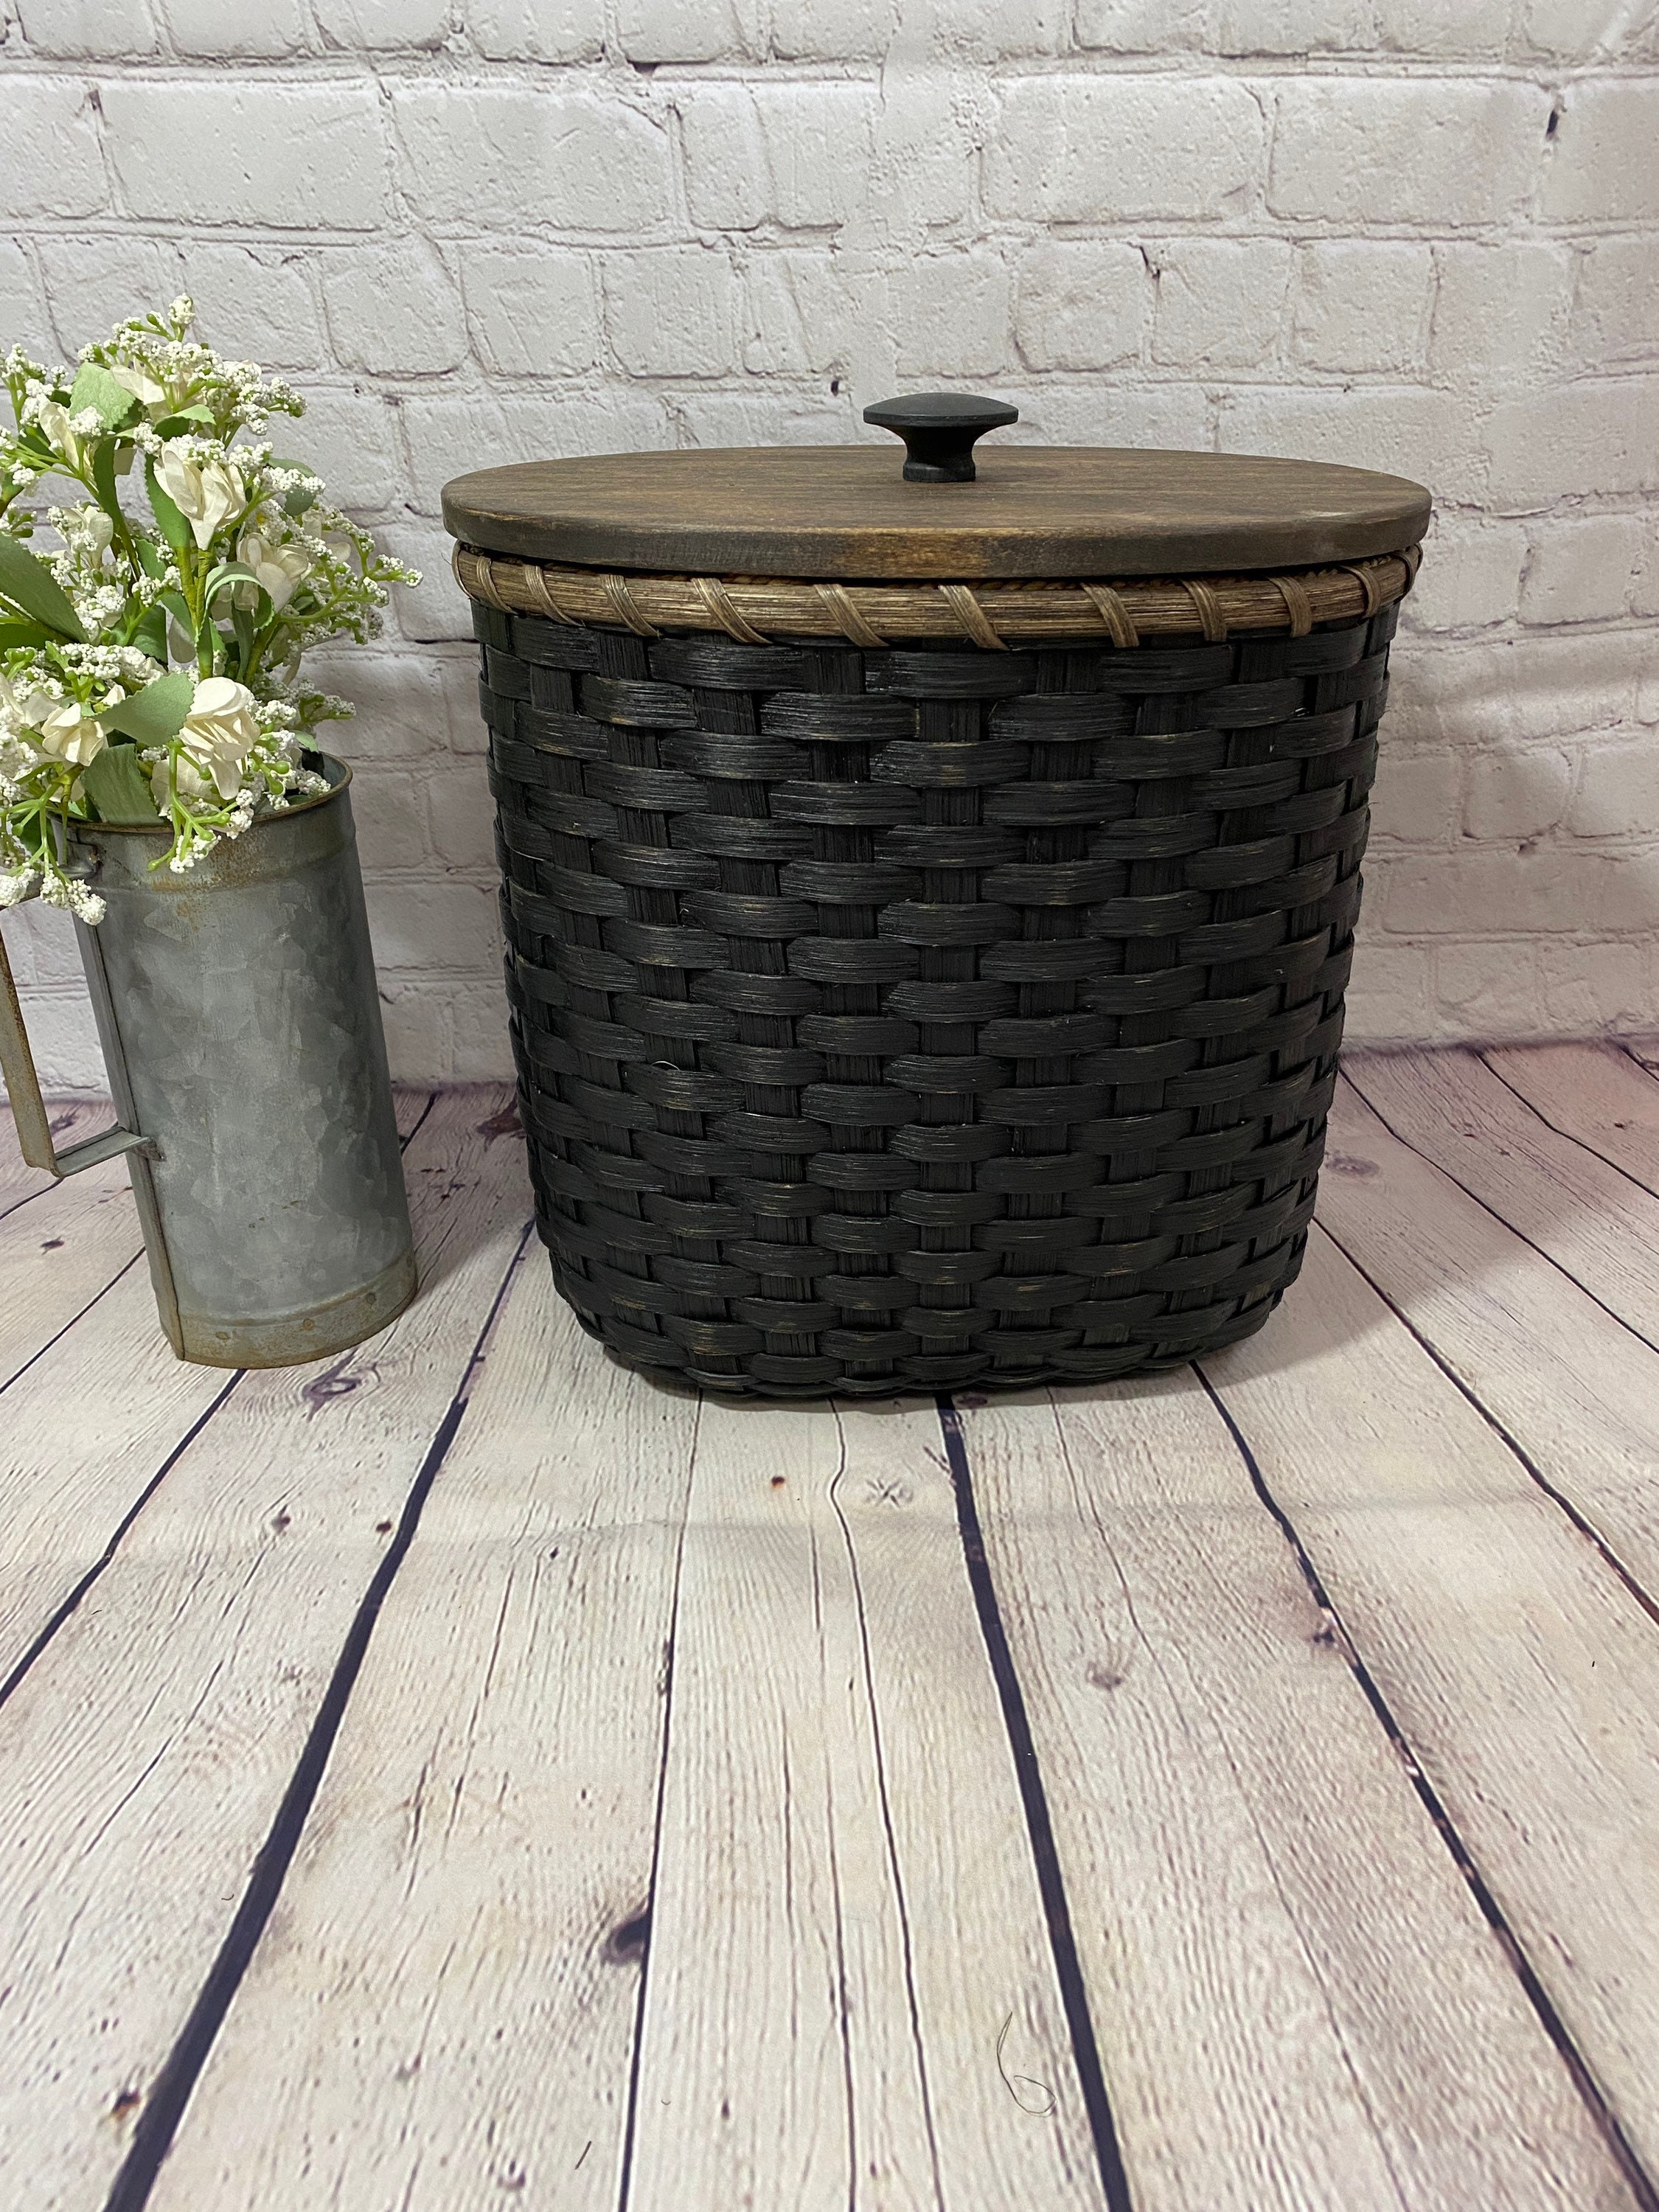 FOH PP Flare Waste Basket Liner with Recycle Decal, Brown, 12 ct